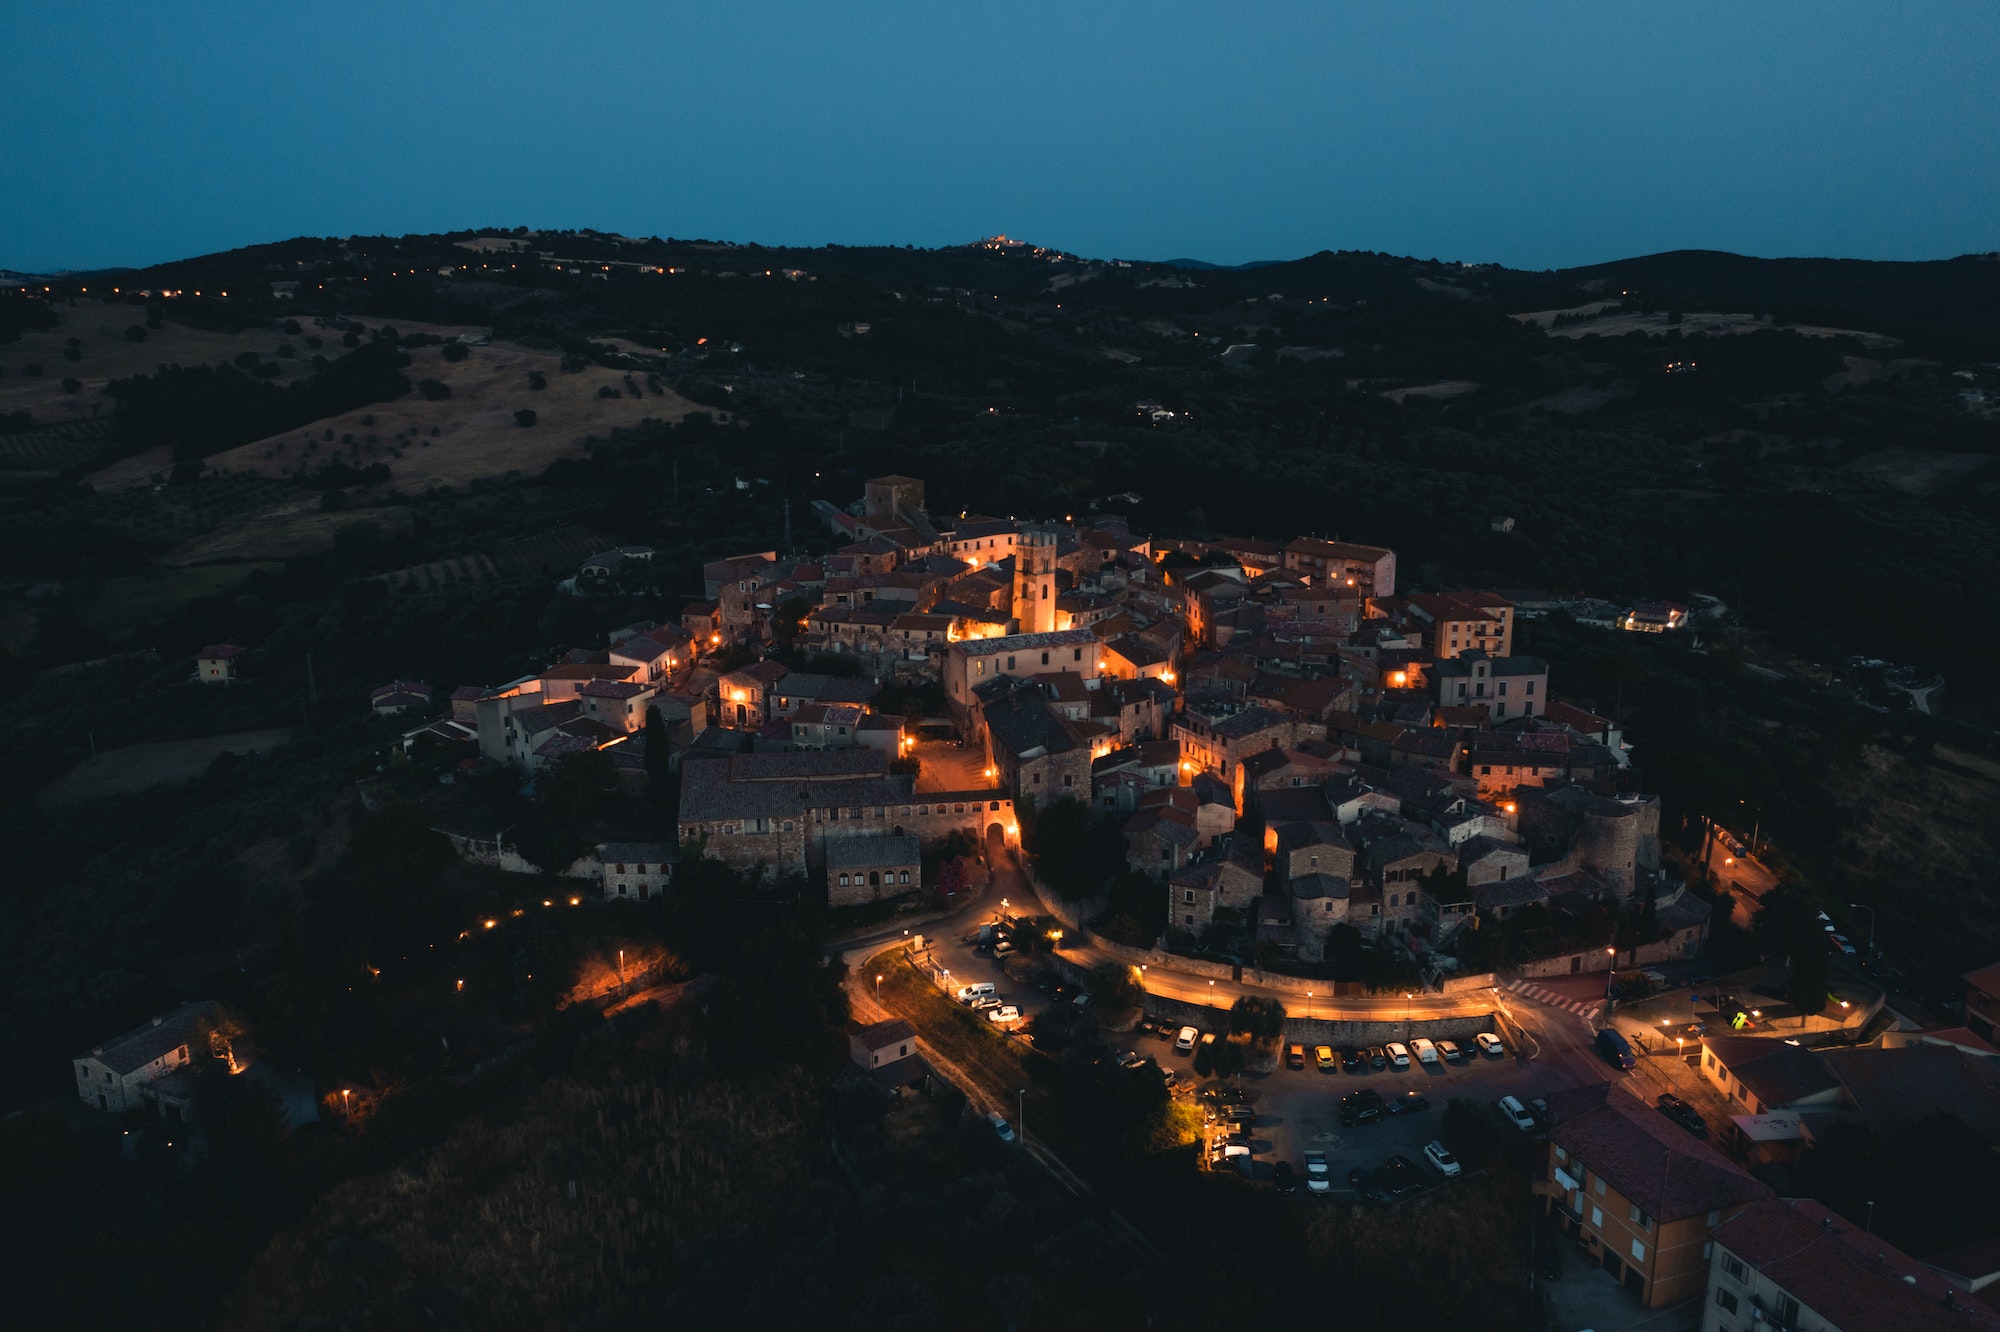 Aerial view of old town of Montemeranoby night, Tuscany, Italy.